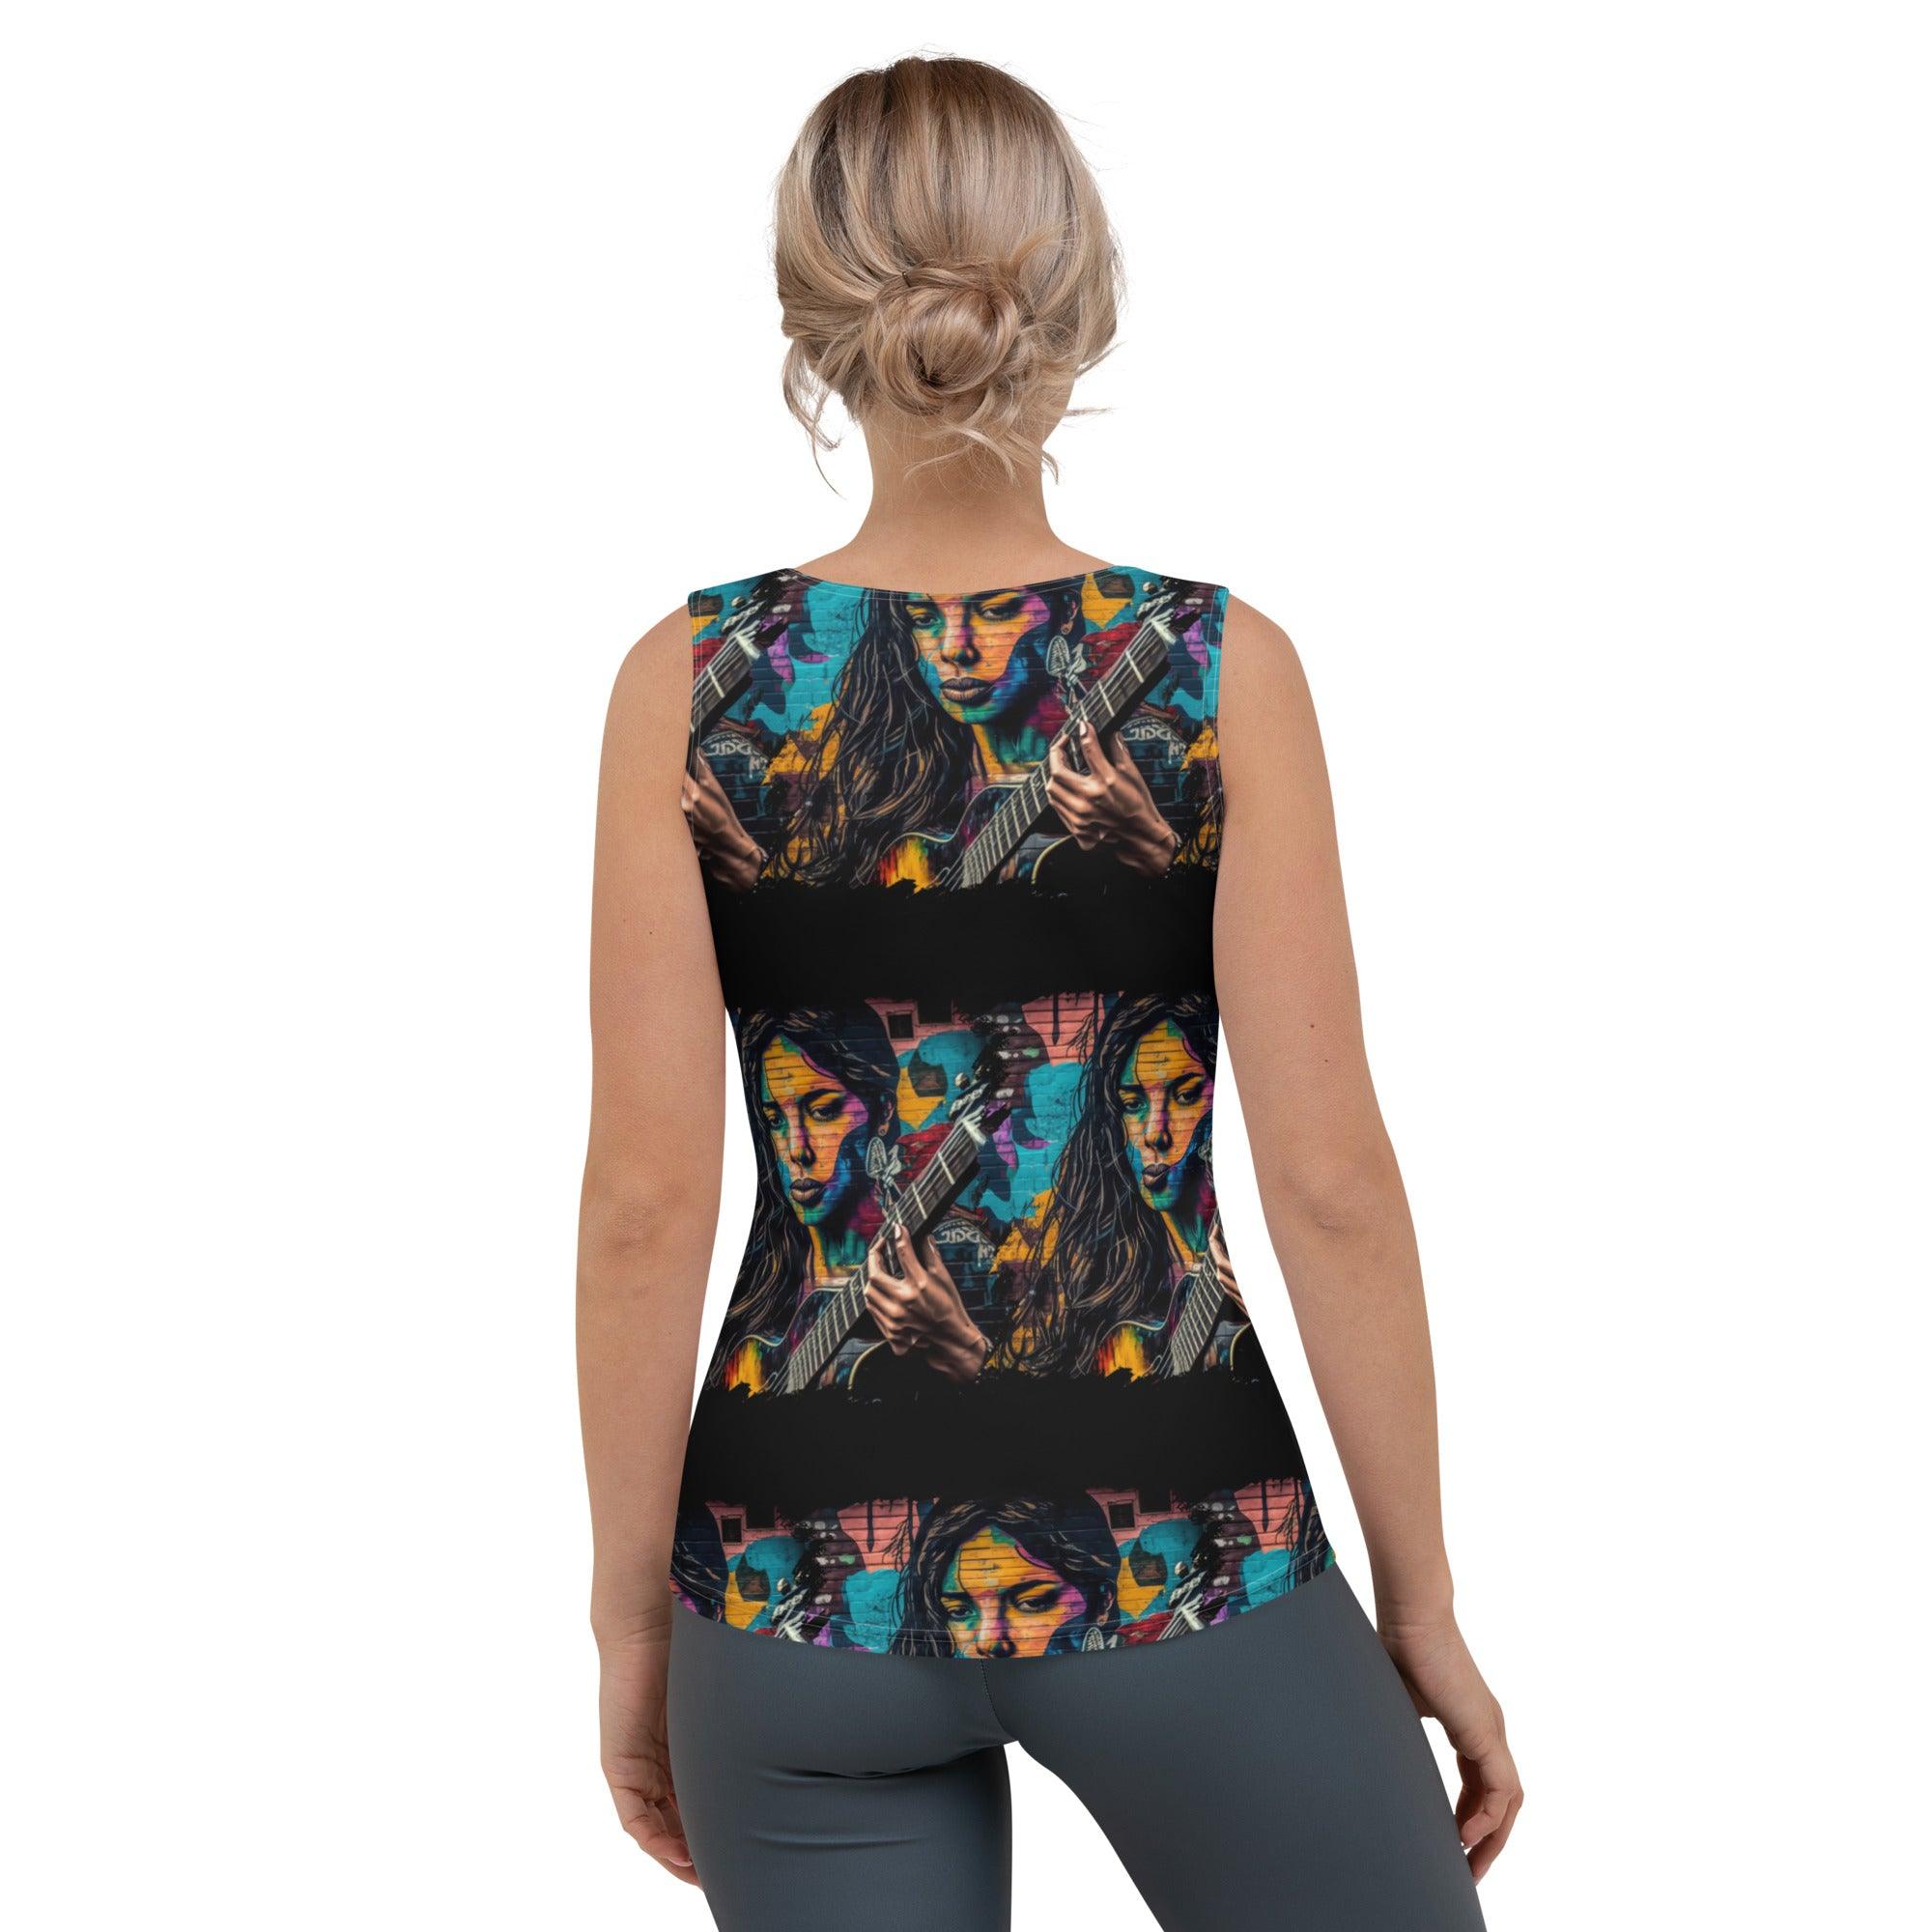 Guitar Is Her Voice Sublimation Cut & Sew Tank Top - Beyond T-shirts